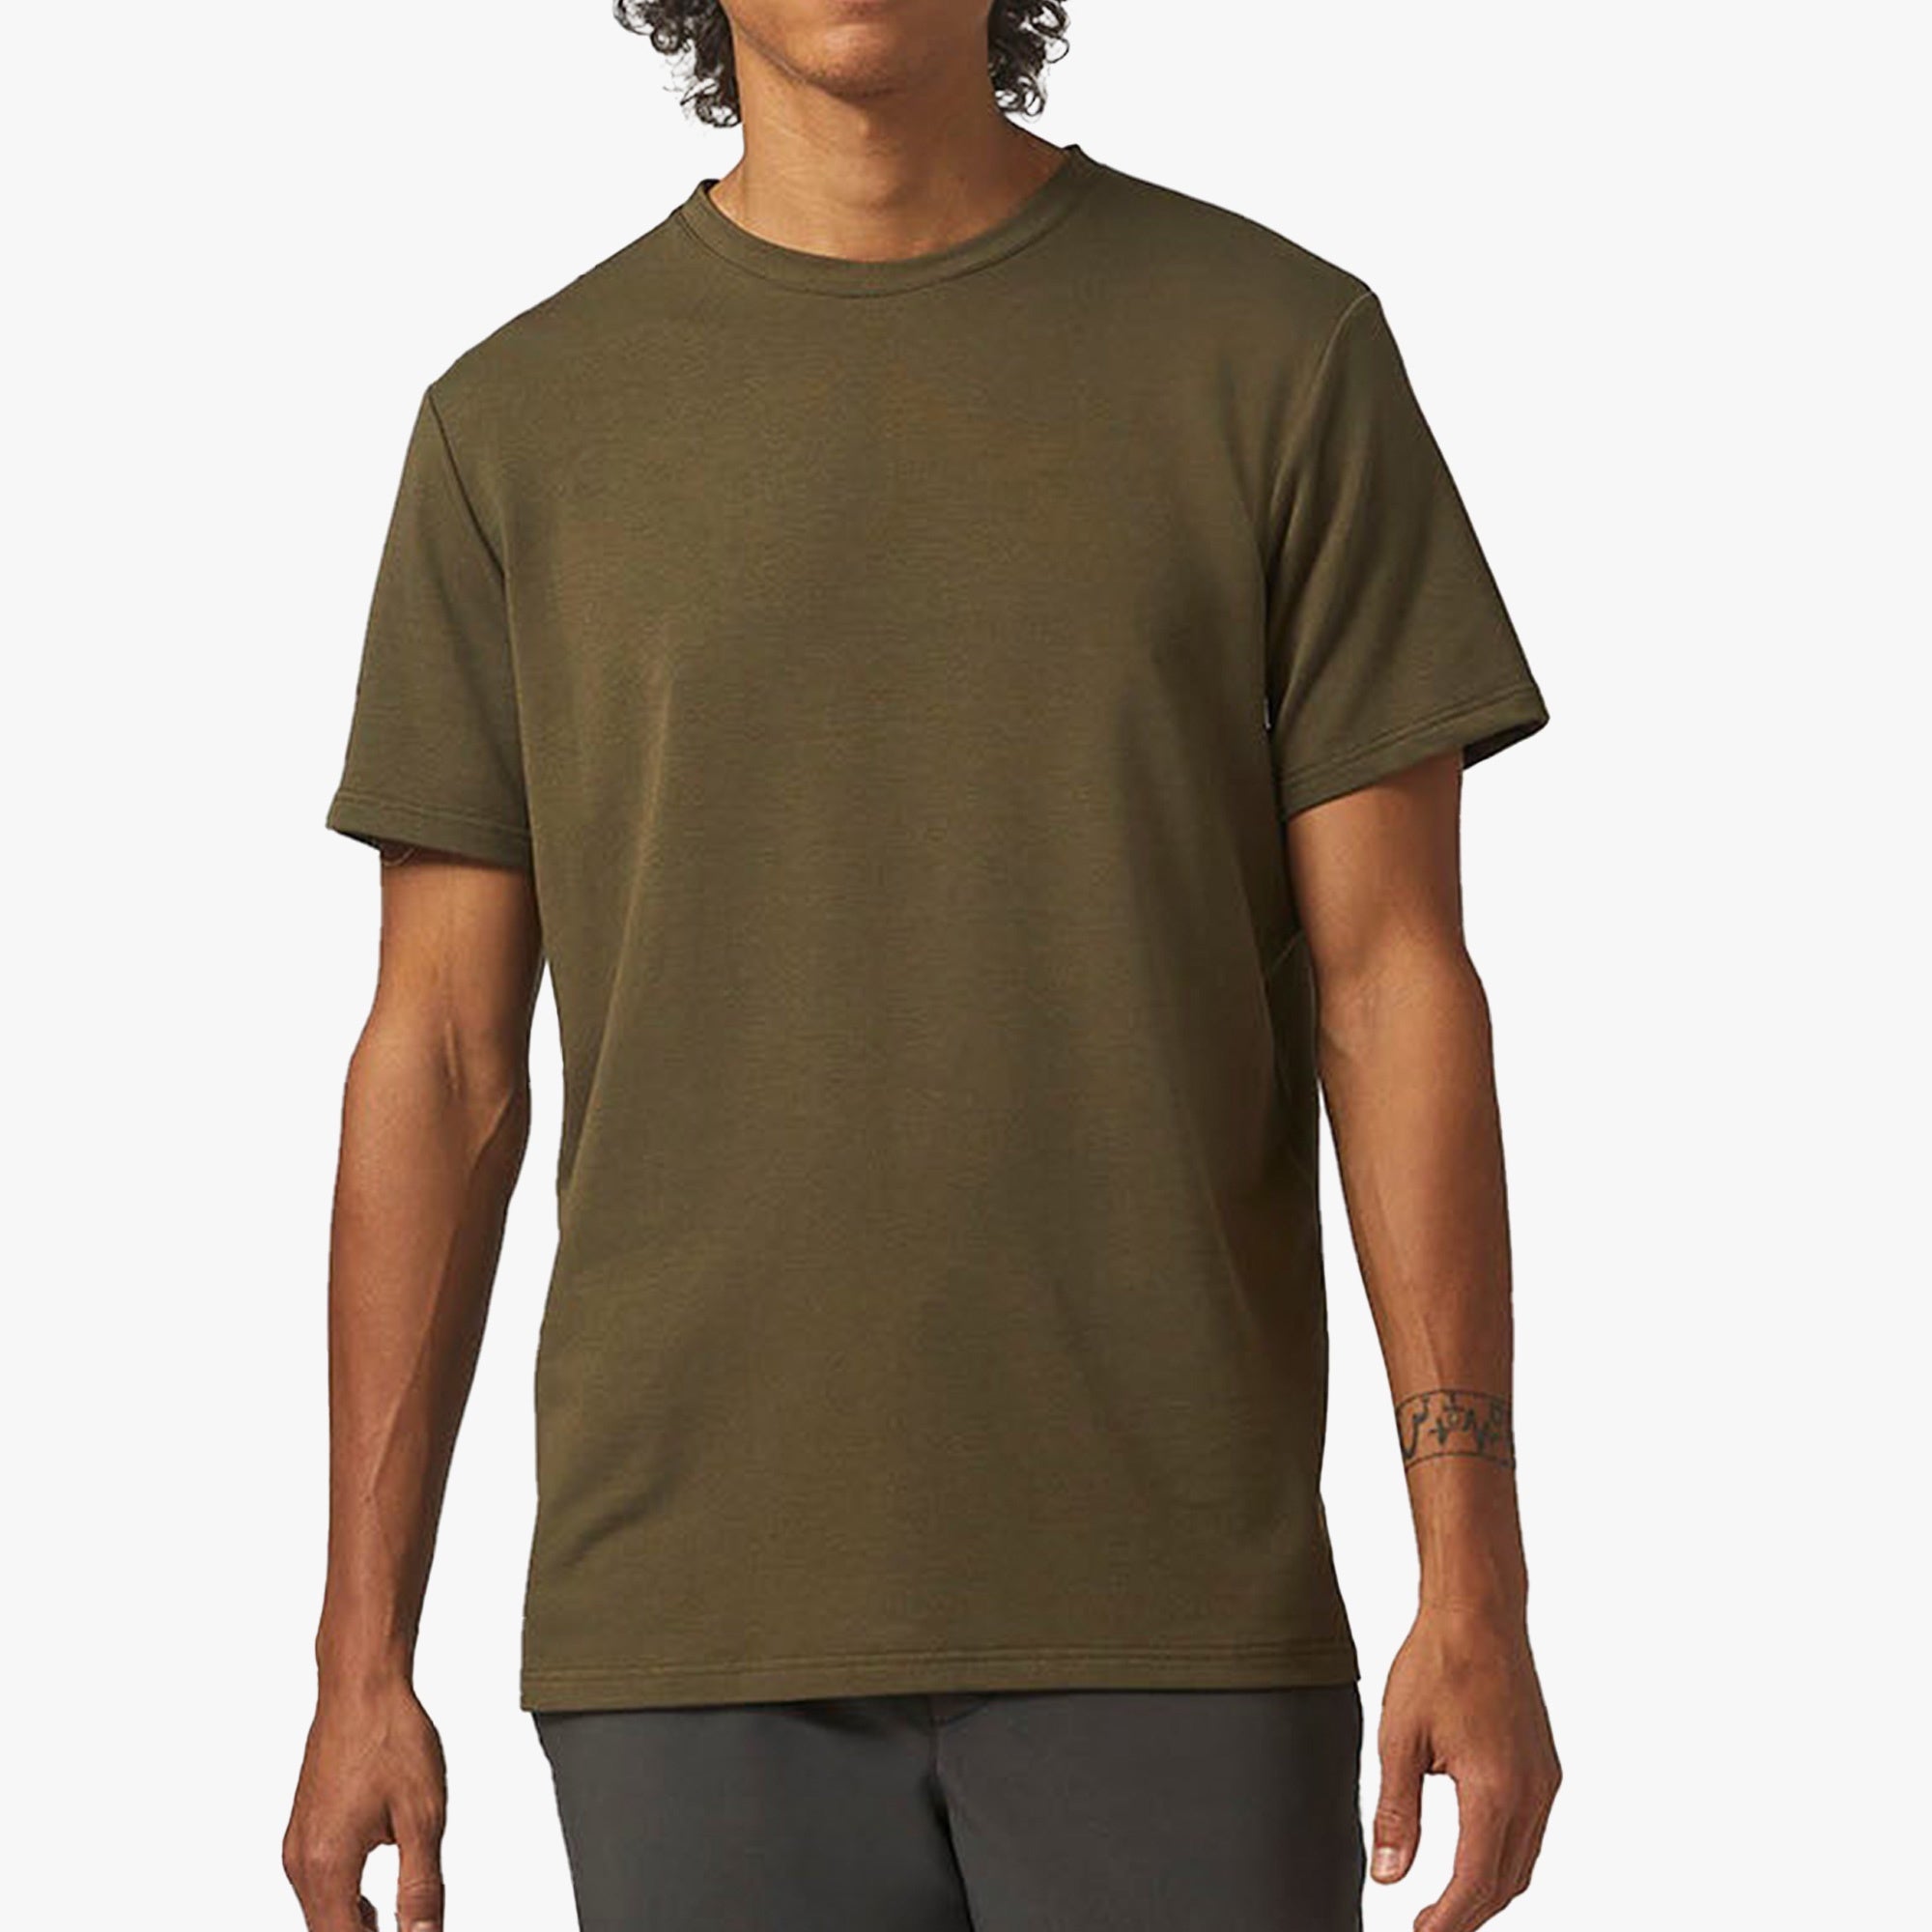 Adesso Man Bamboo T-Shirt - Olive